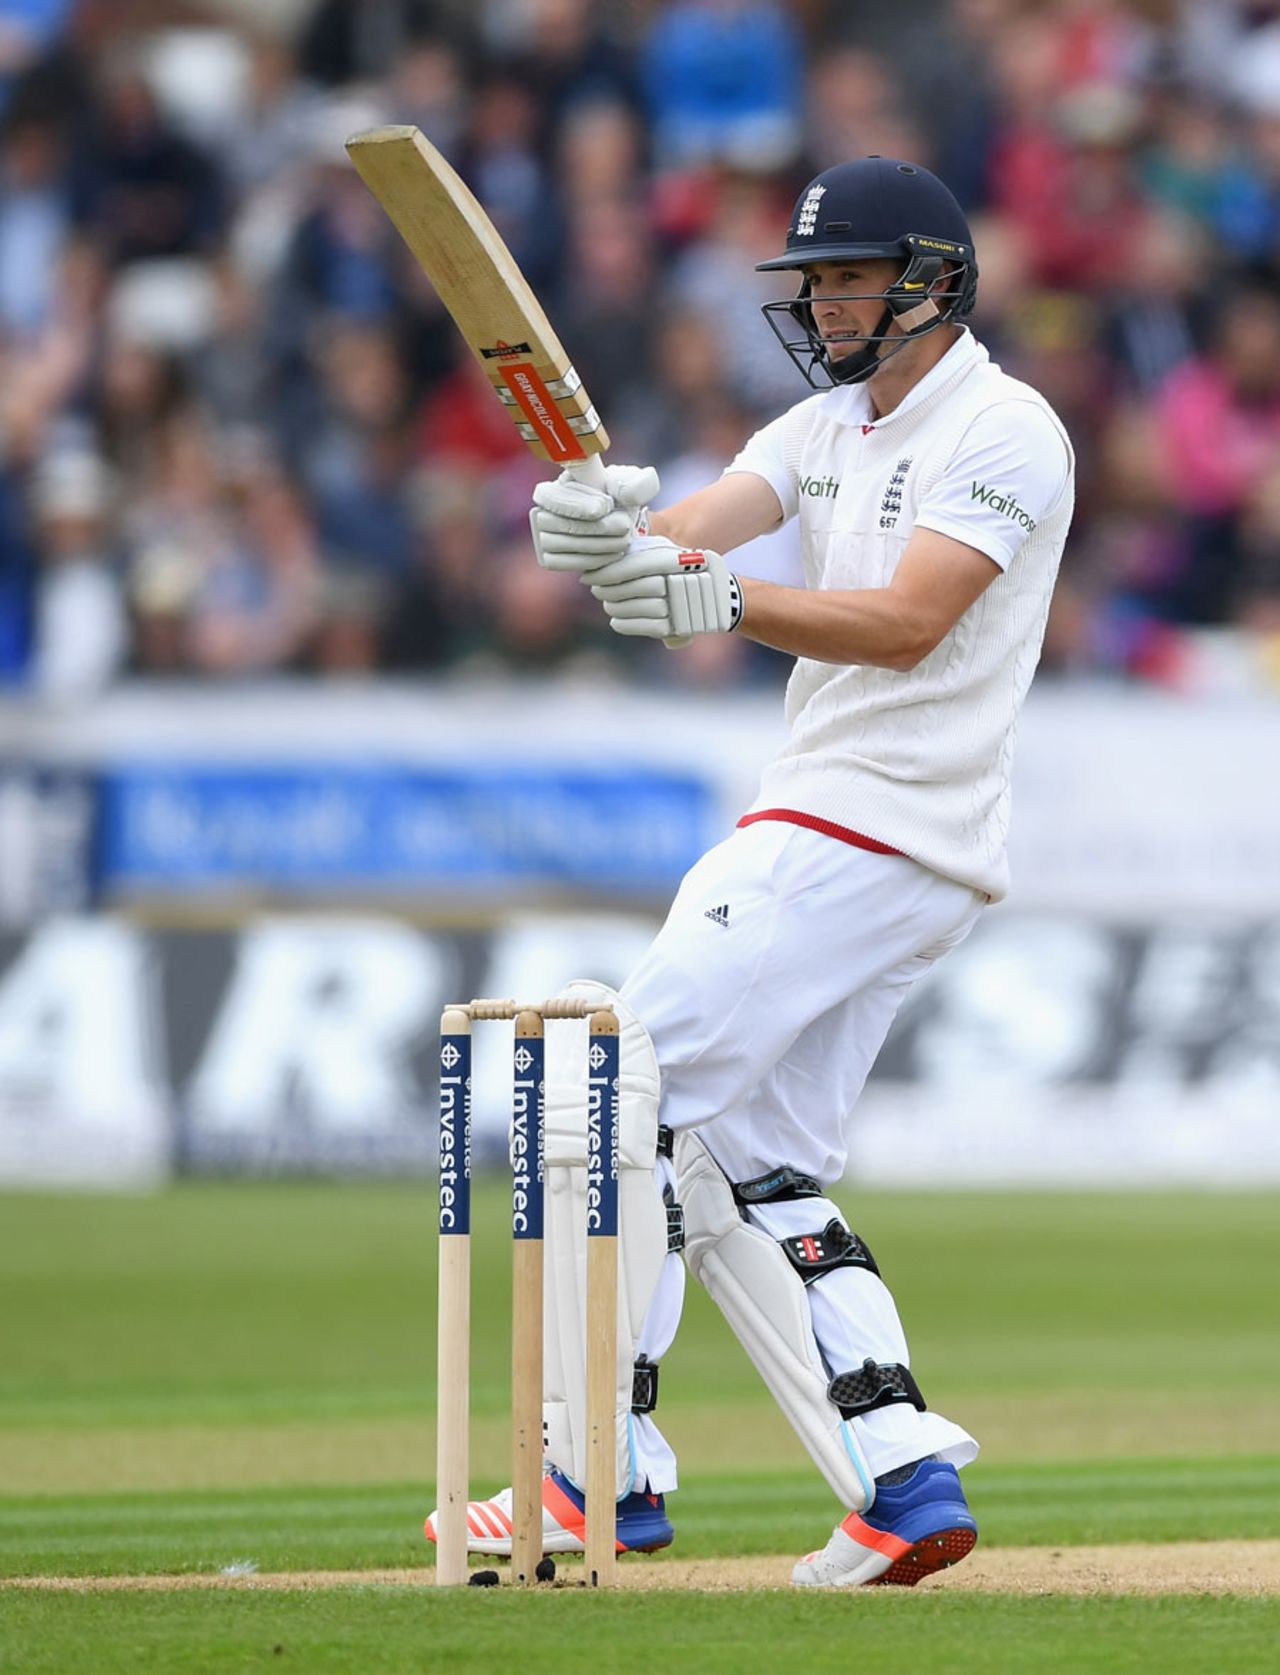 Chris Woakes pulls through the leg-side, England v Sri Lanka, 2nd Test, Chester-le-Street, 2nd day, May 28, 2016